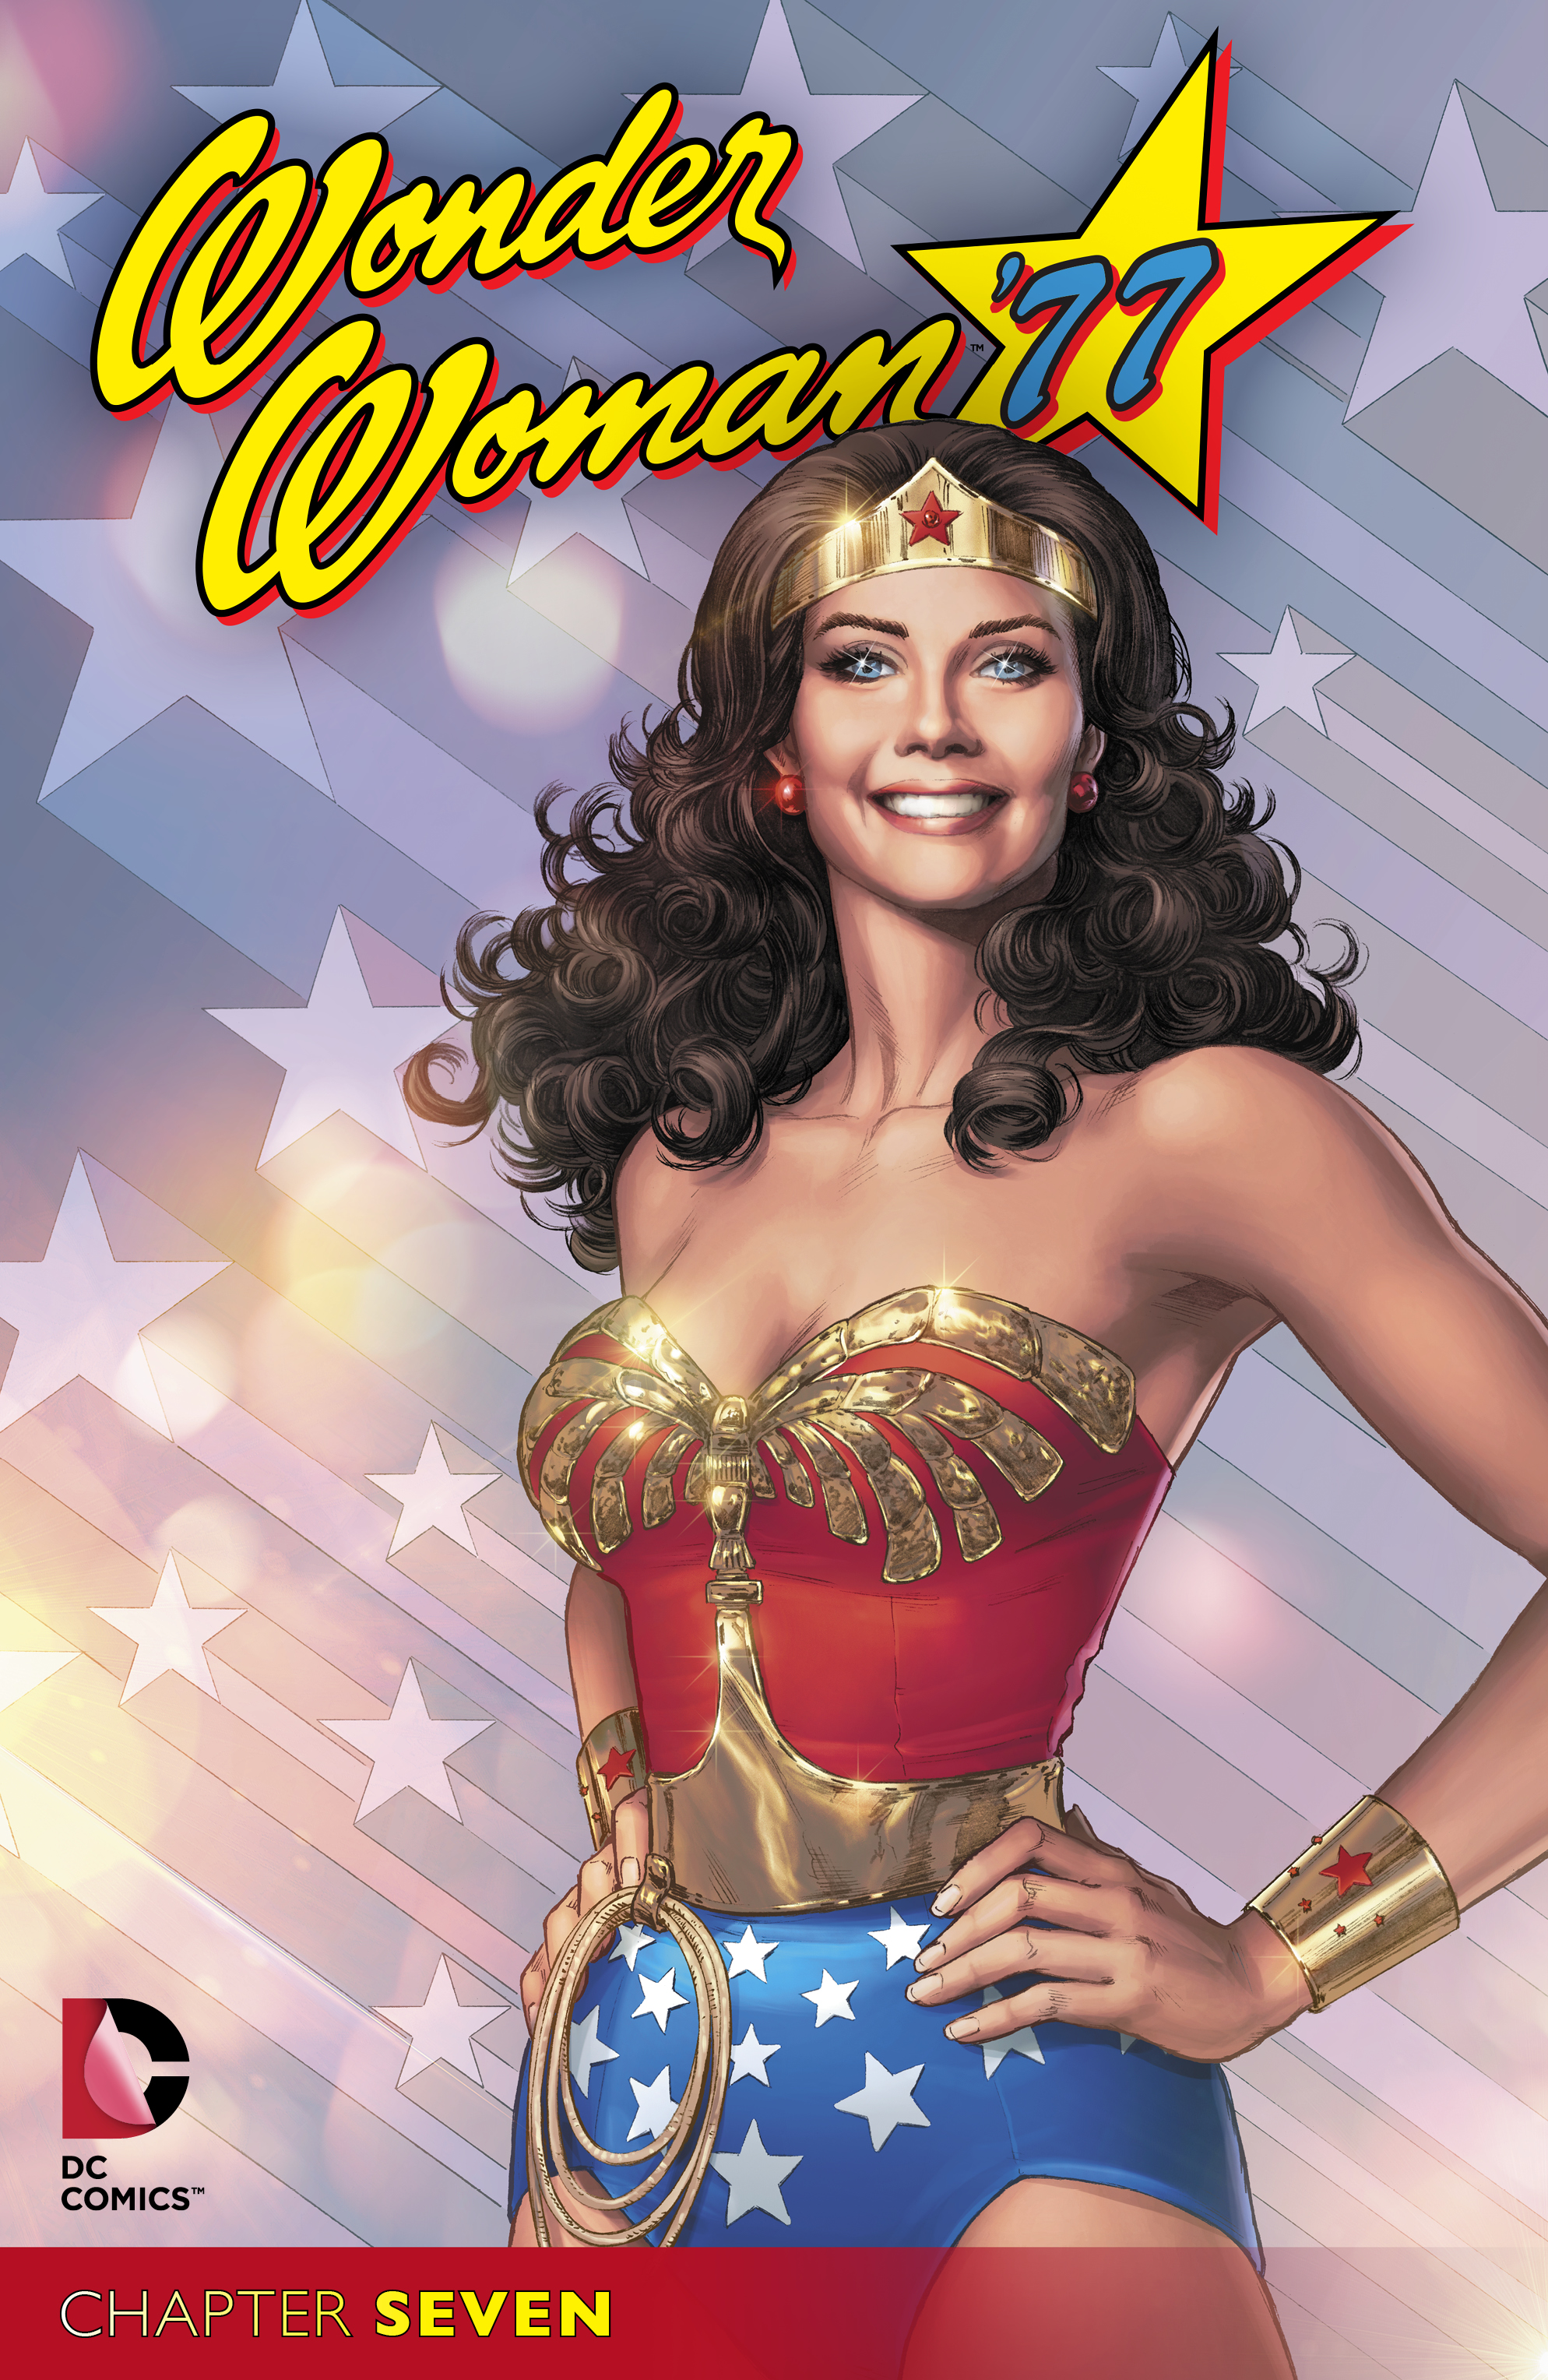 Wonder Woman '77 #7 preview images